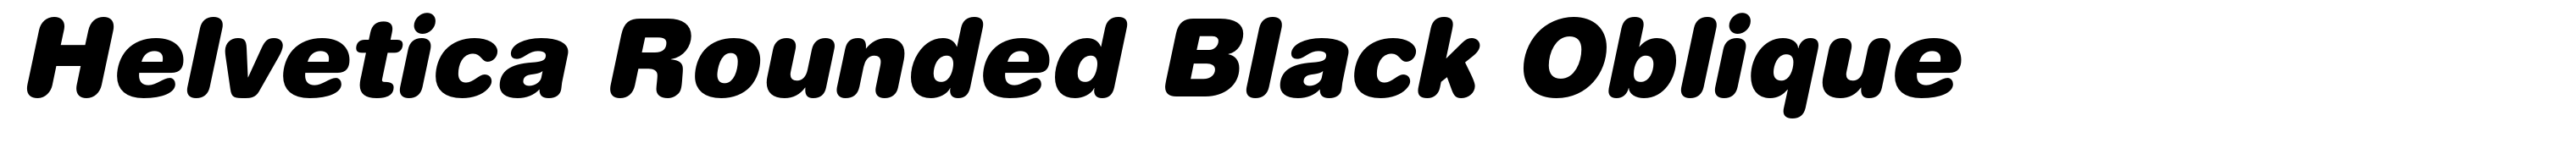 Helvetica Rounded Black Oblique